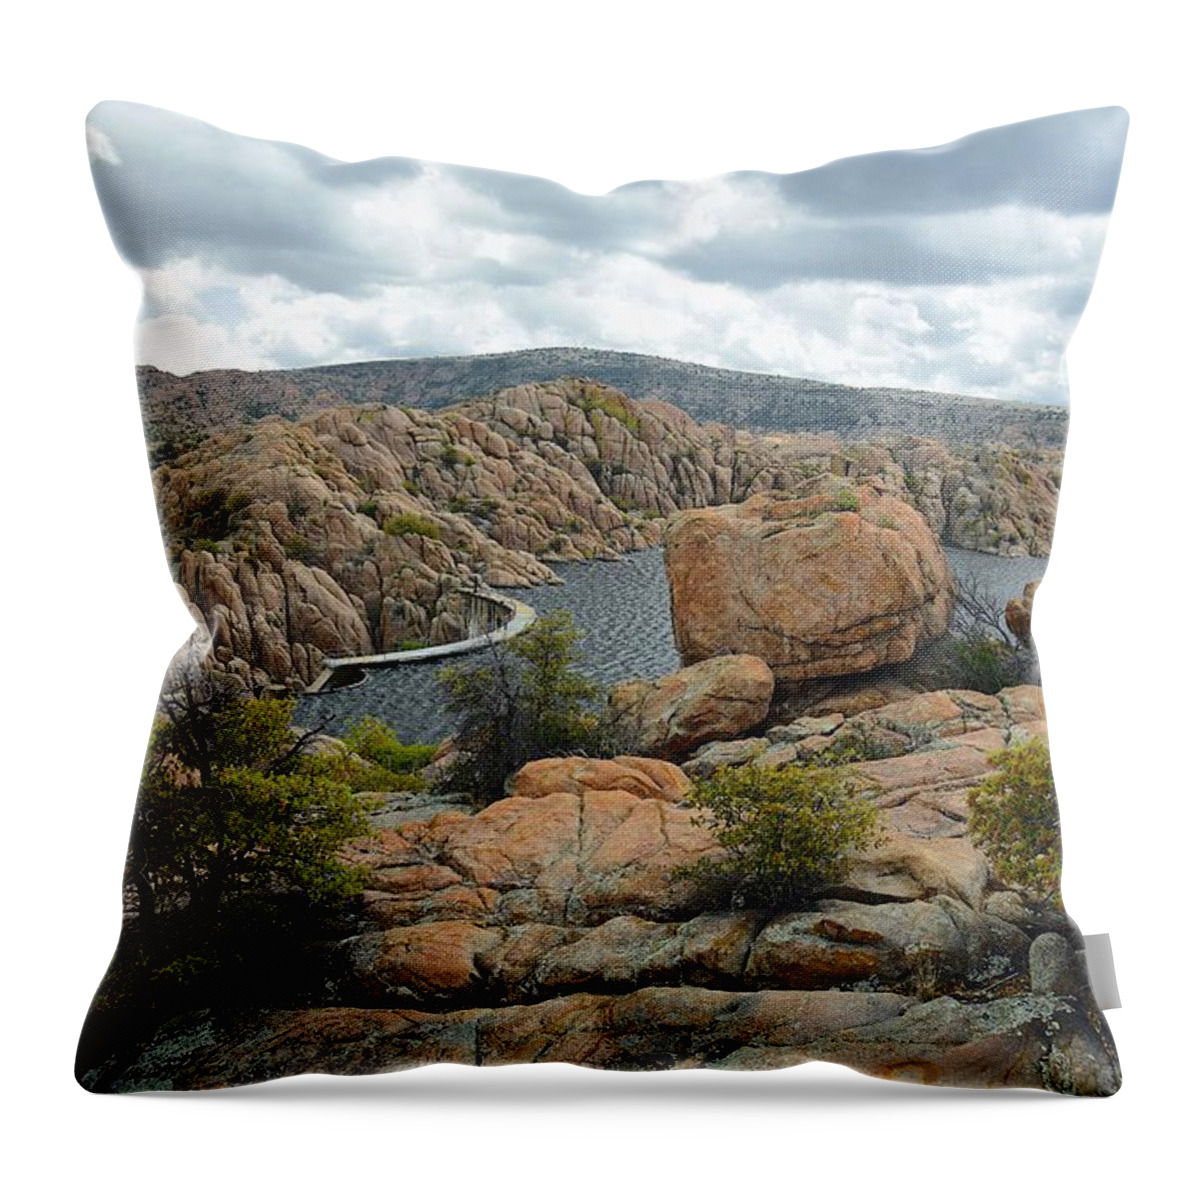 Photograph Throw Pillow featuring the photograph Boulders by the Dam by Richard Gehlbach